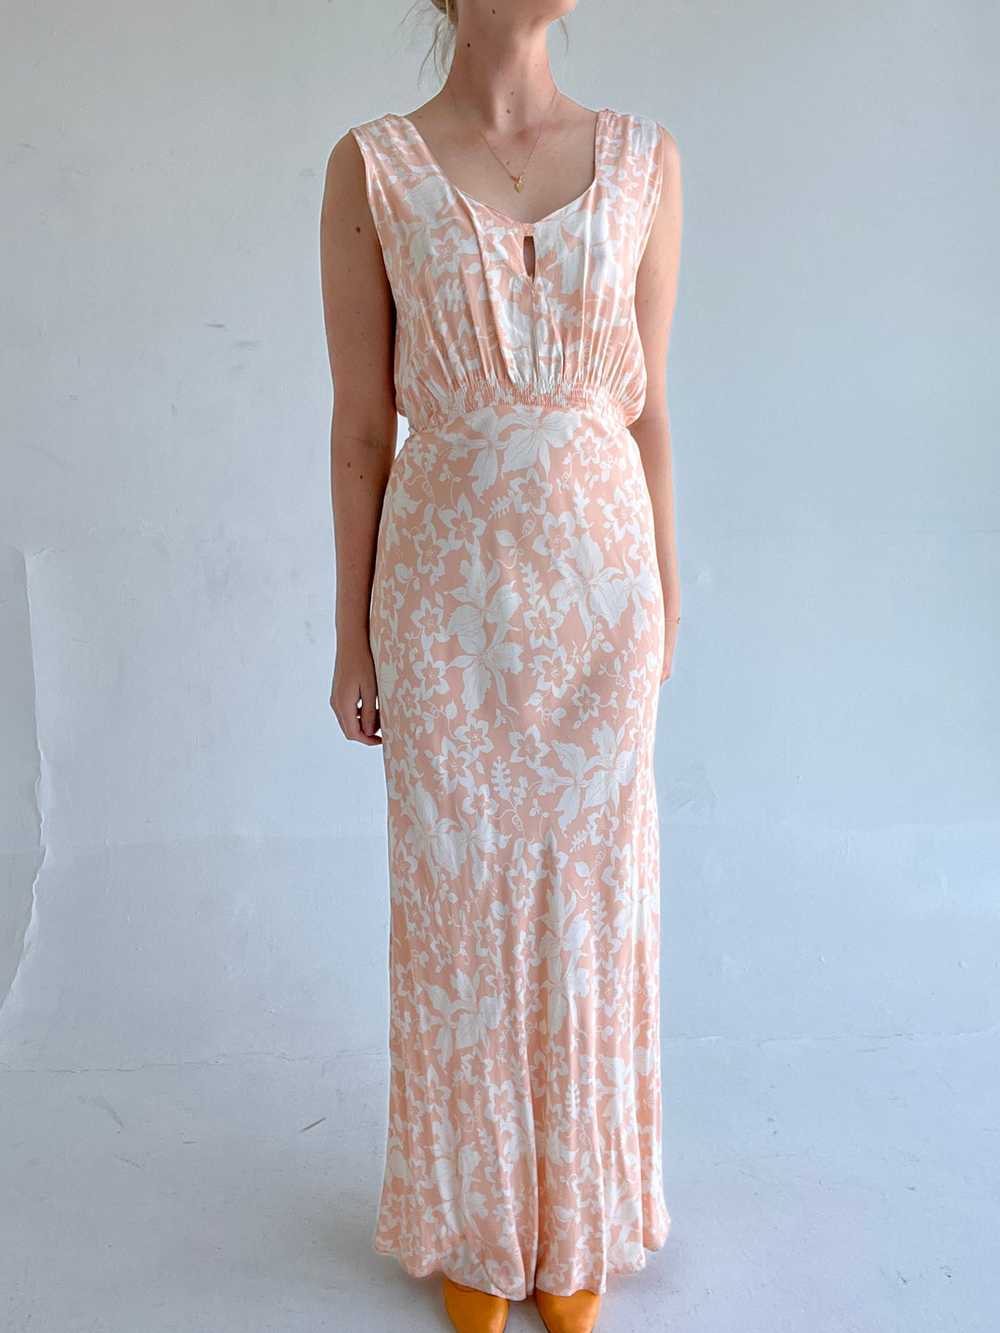 1940's Peach and White Floral Slip - image 2